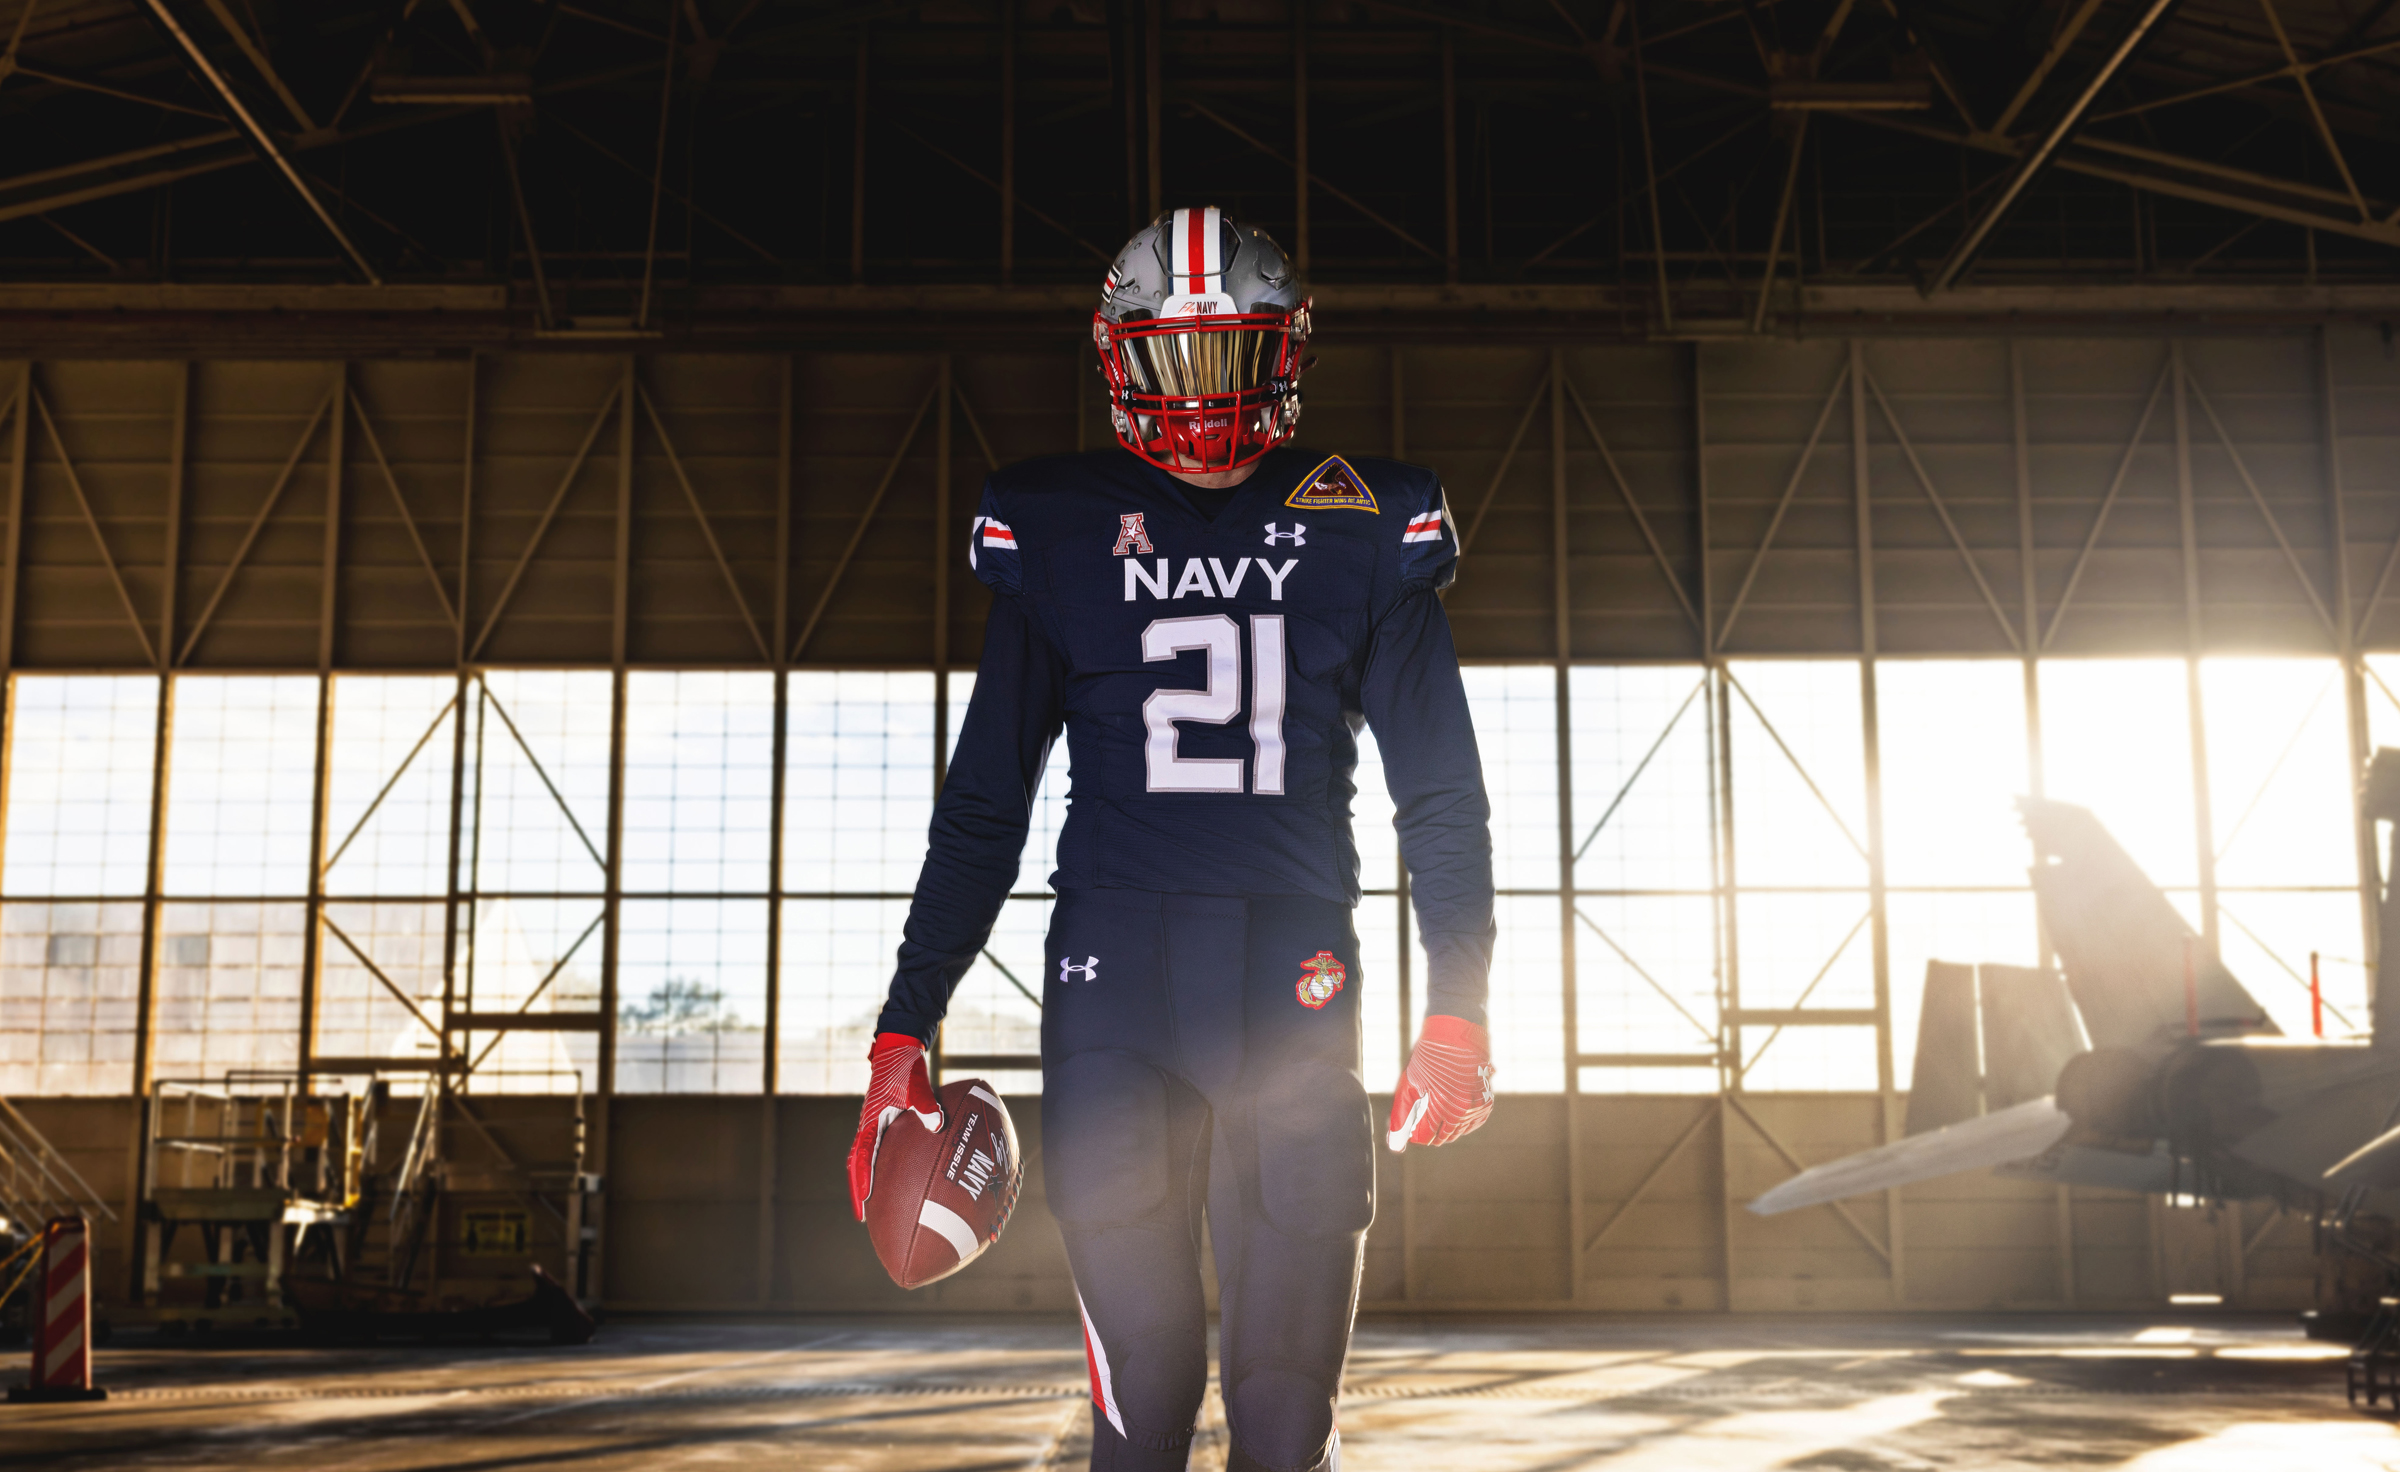 Special Navy uniforms for Army-Navy game 2021